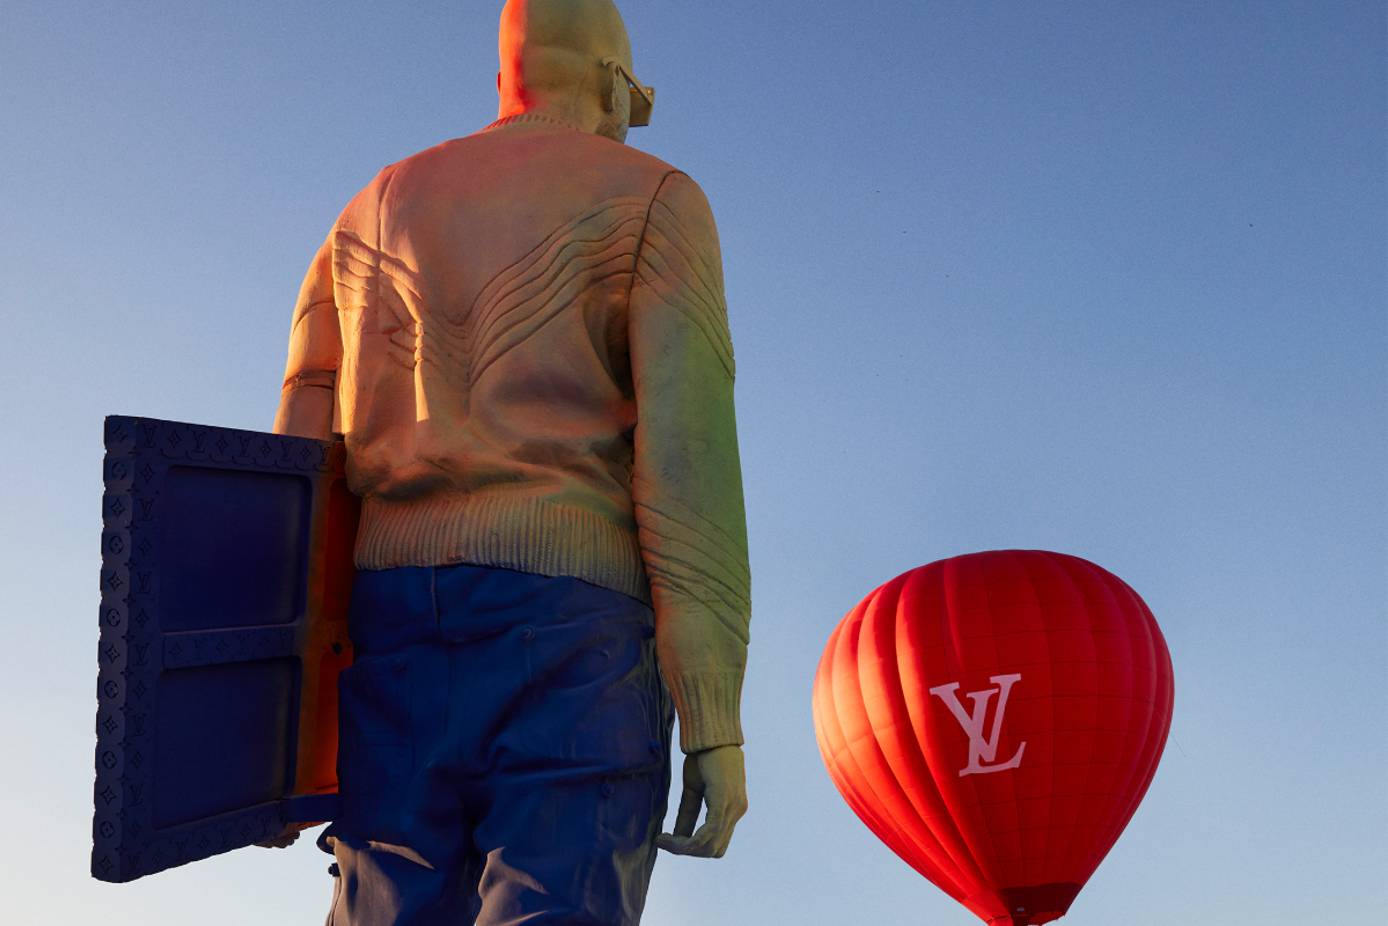 In Pictures: Louis Vuitton's SS22 spin-off in memory of Virgil Abloh